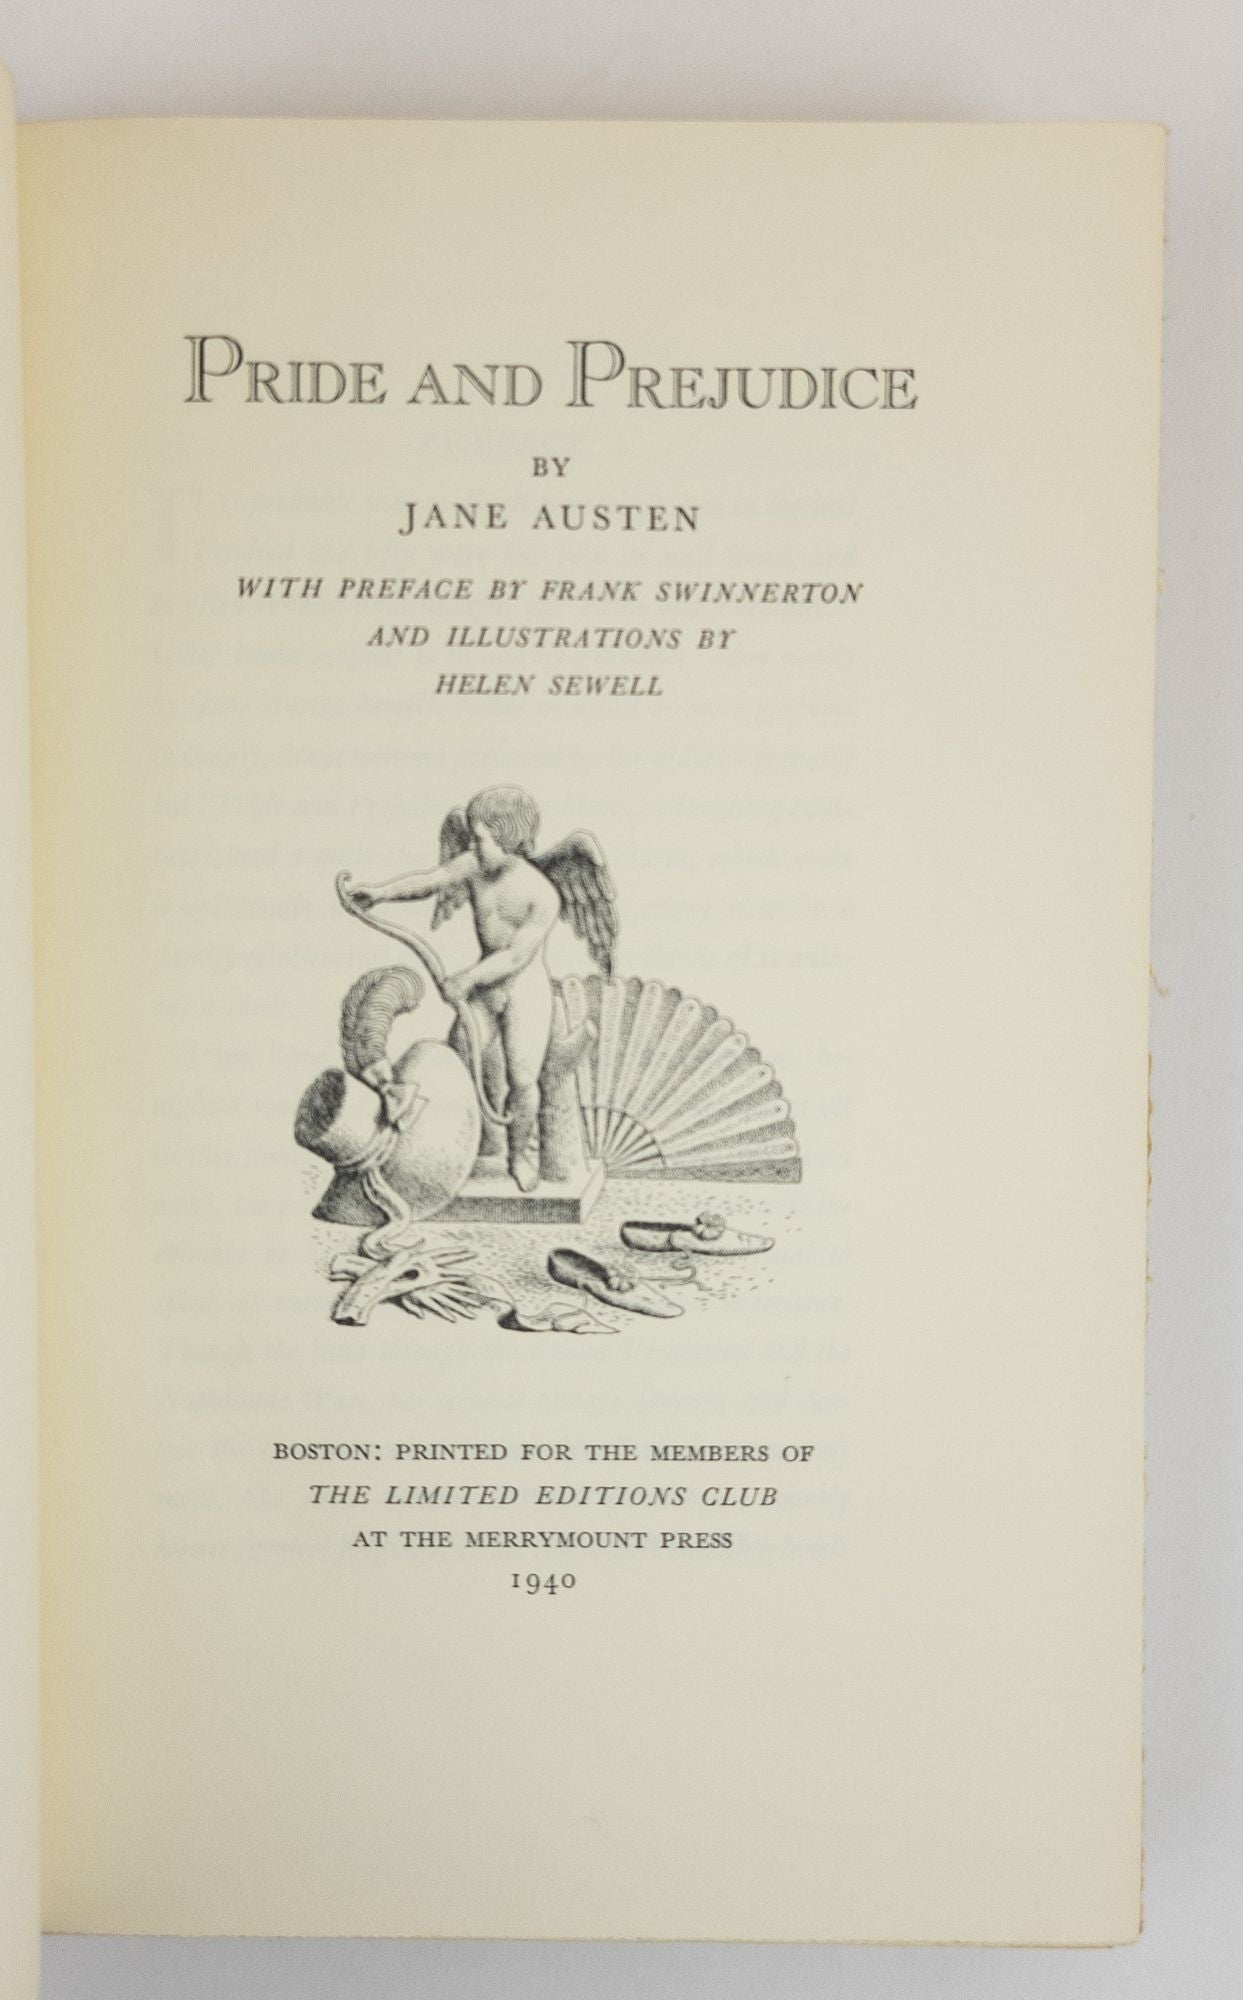 Product Image for PRIDE AND PREJUDICE [Signed]